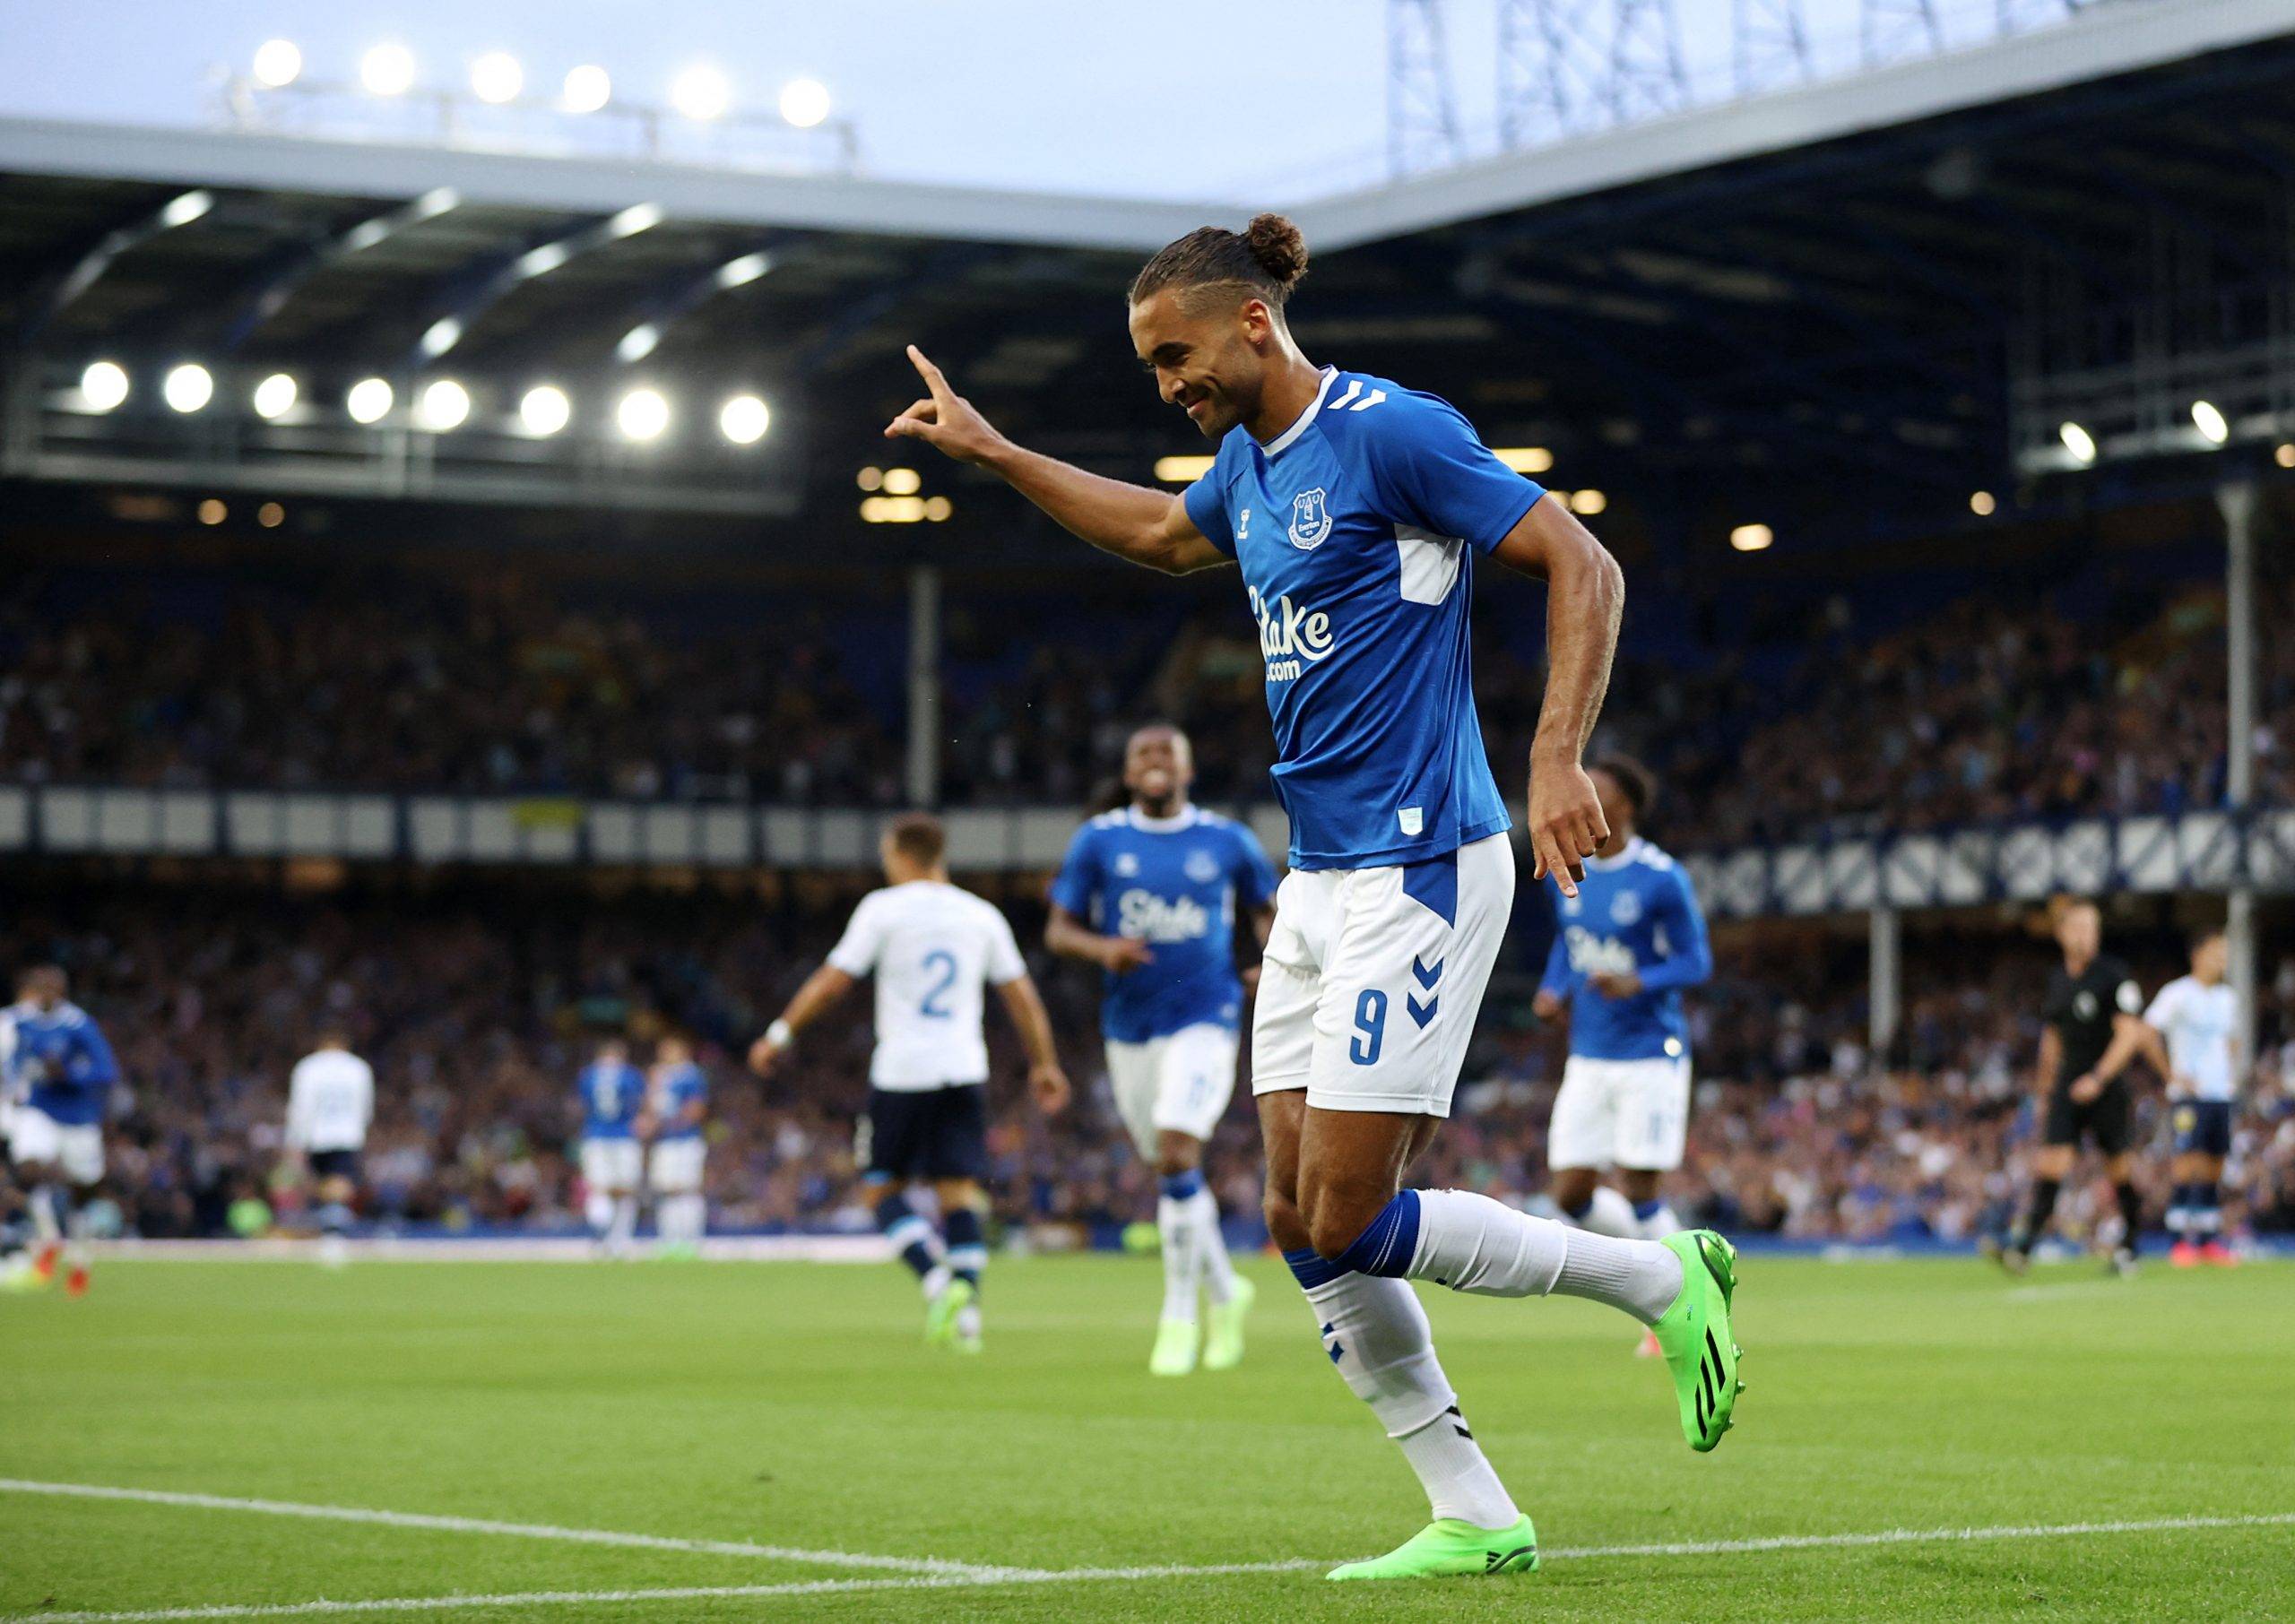 Everton could be without Calvert-Lewin again as he misses training session - Everton News